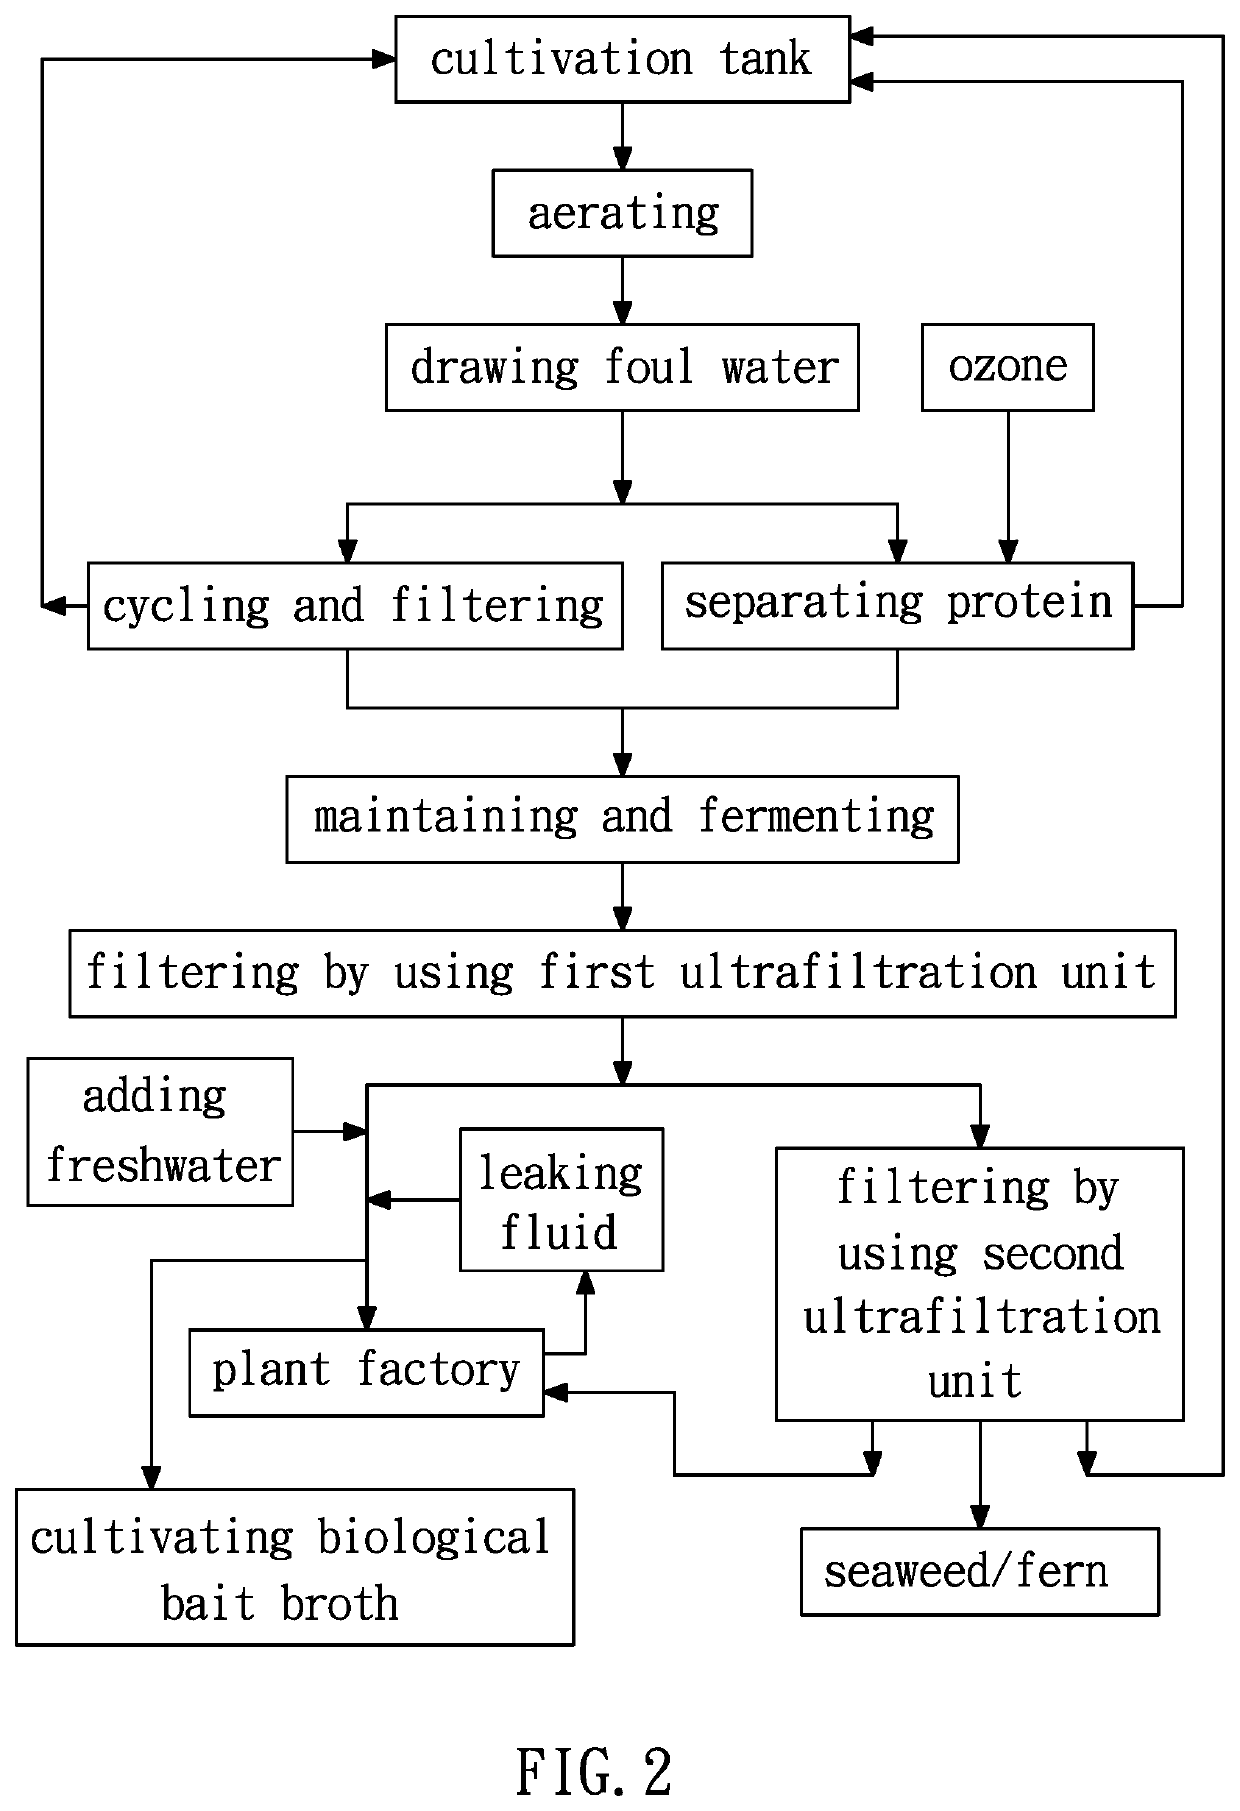 System of Cultivating Aquatic Product and Plant